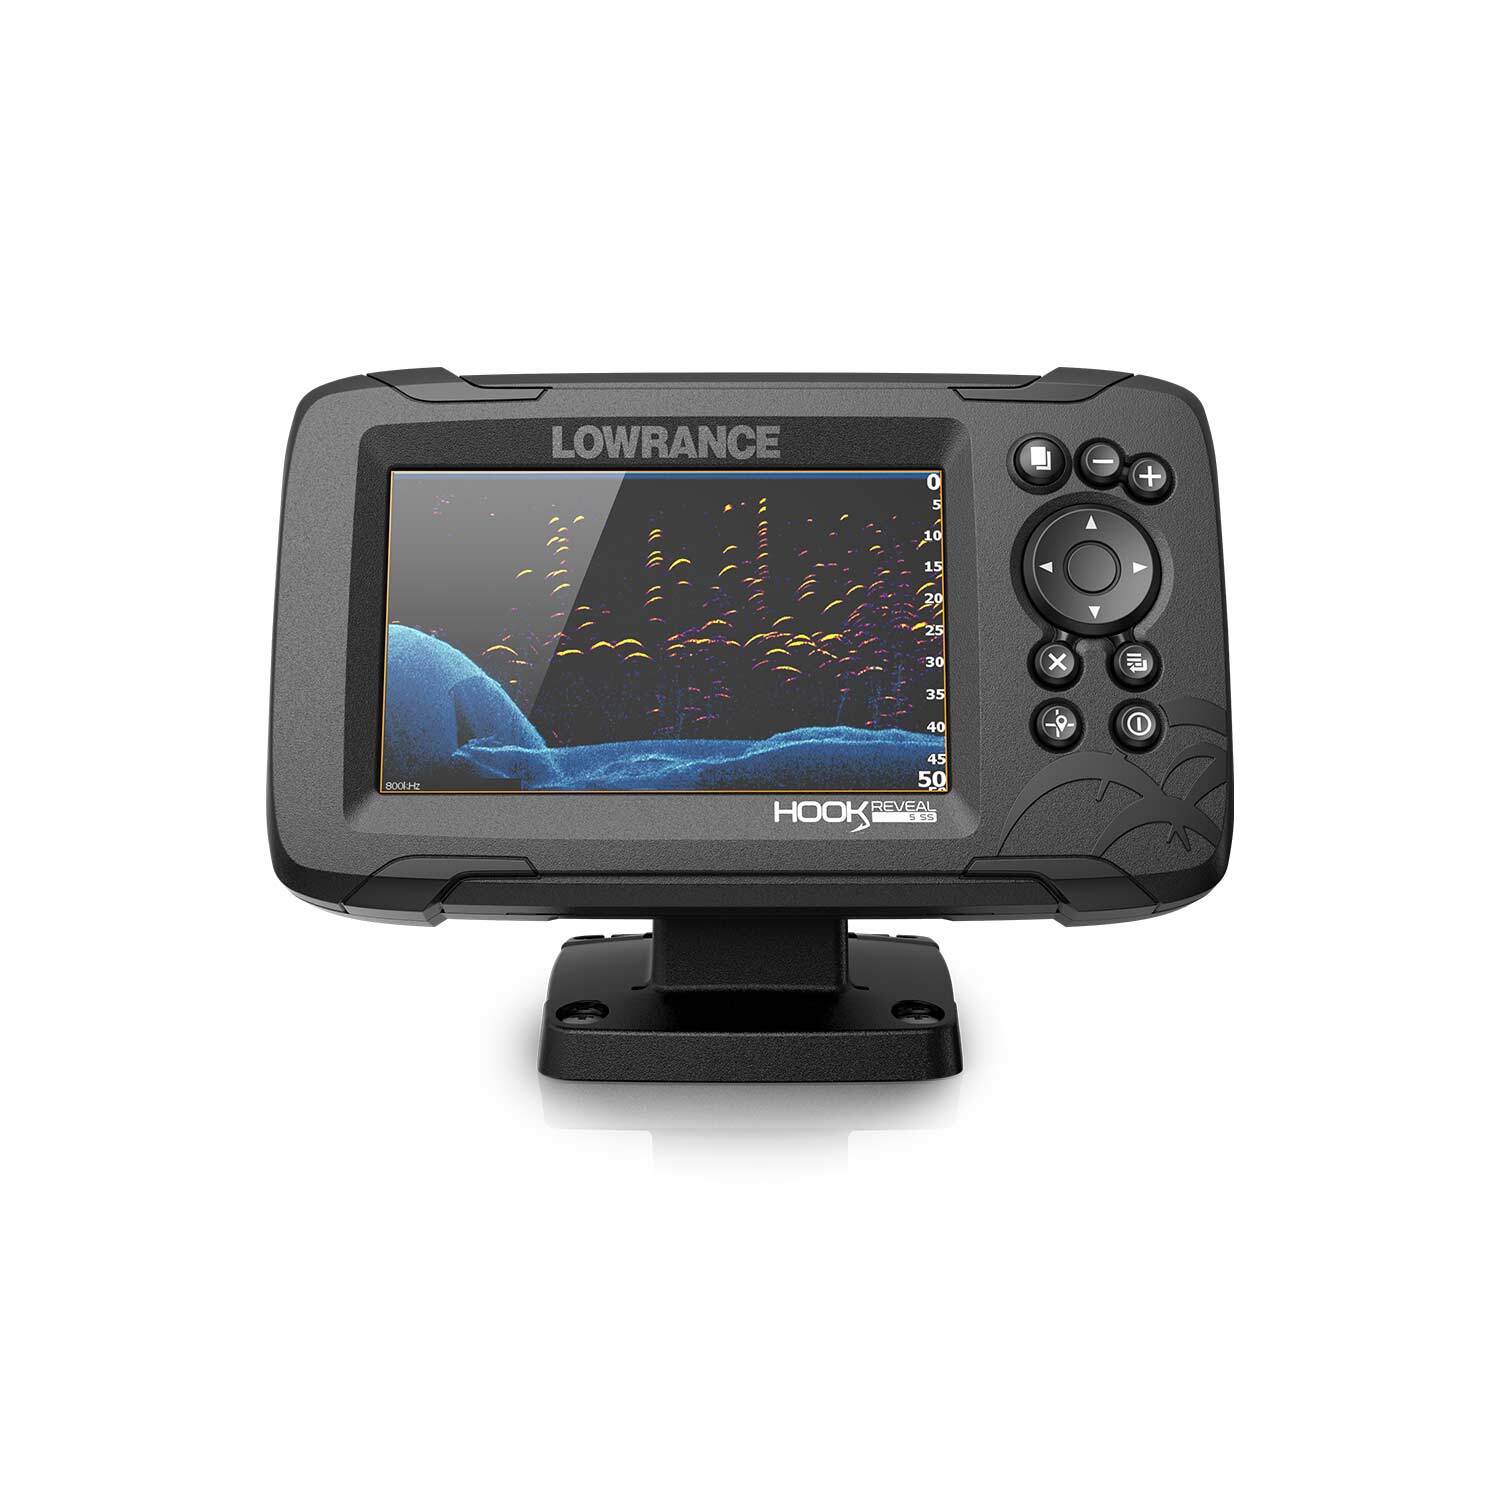 LOWRANCE HOOK Reveal 5 Fishfinder/Chartplotter Combo with SplitShot  Transducer and C-MAP Contour Plus Charts